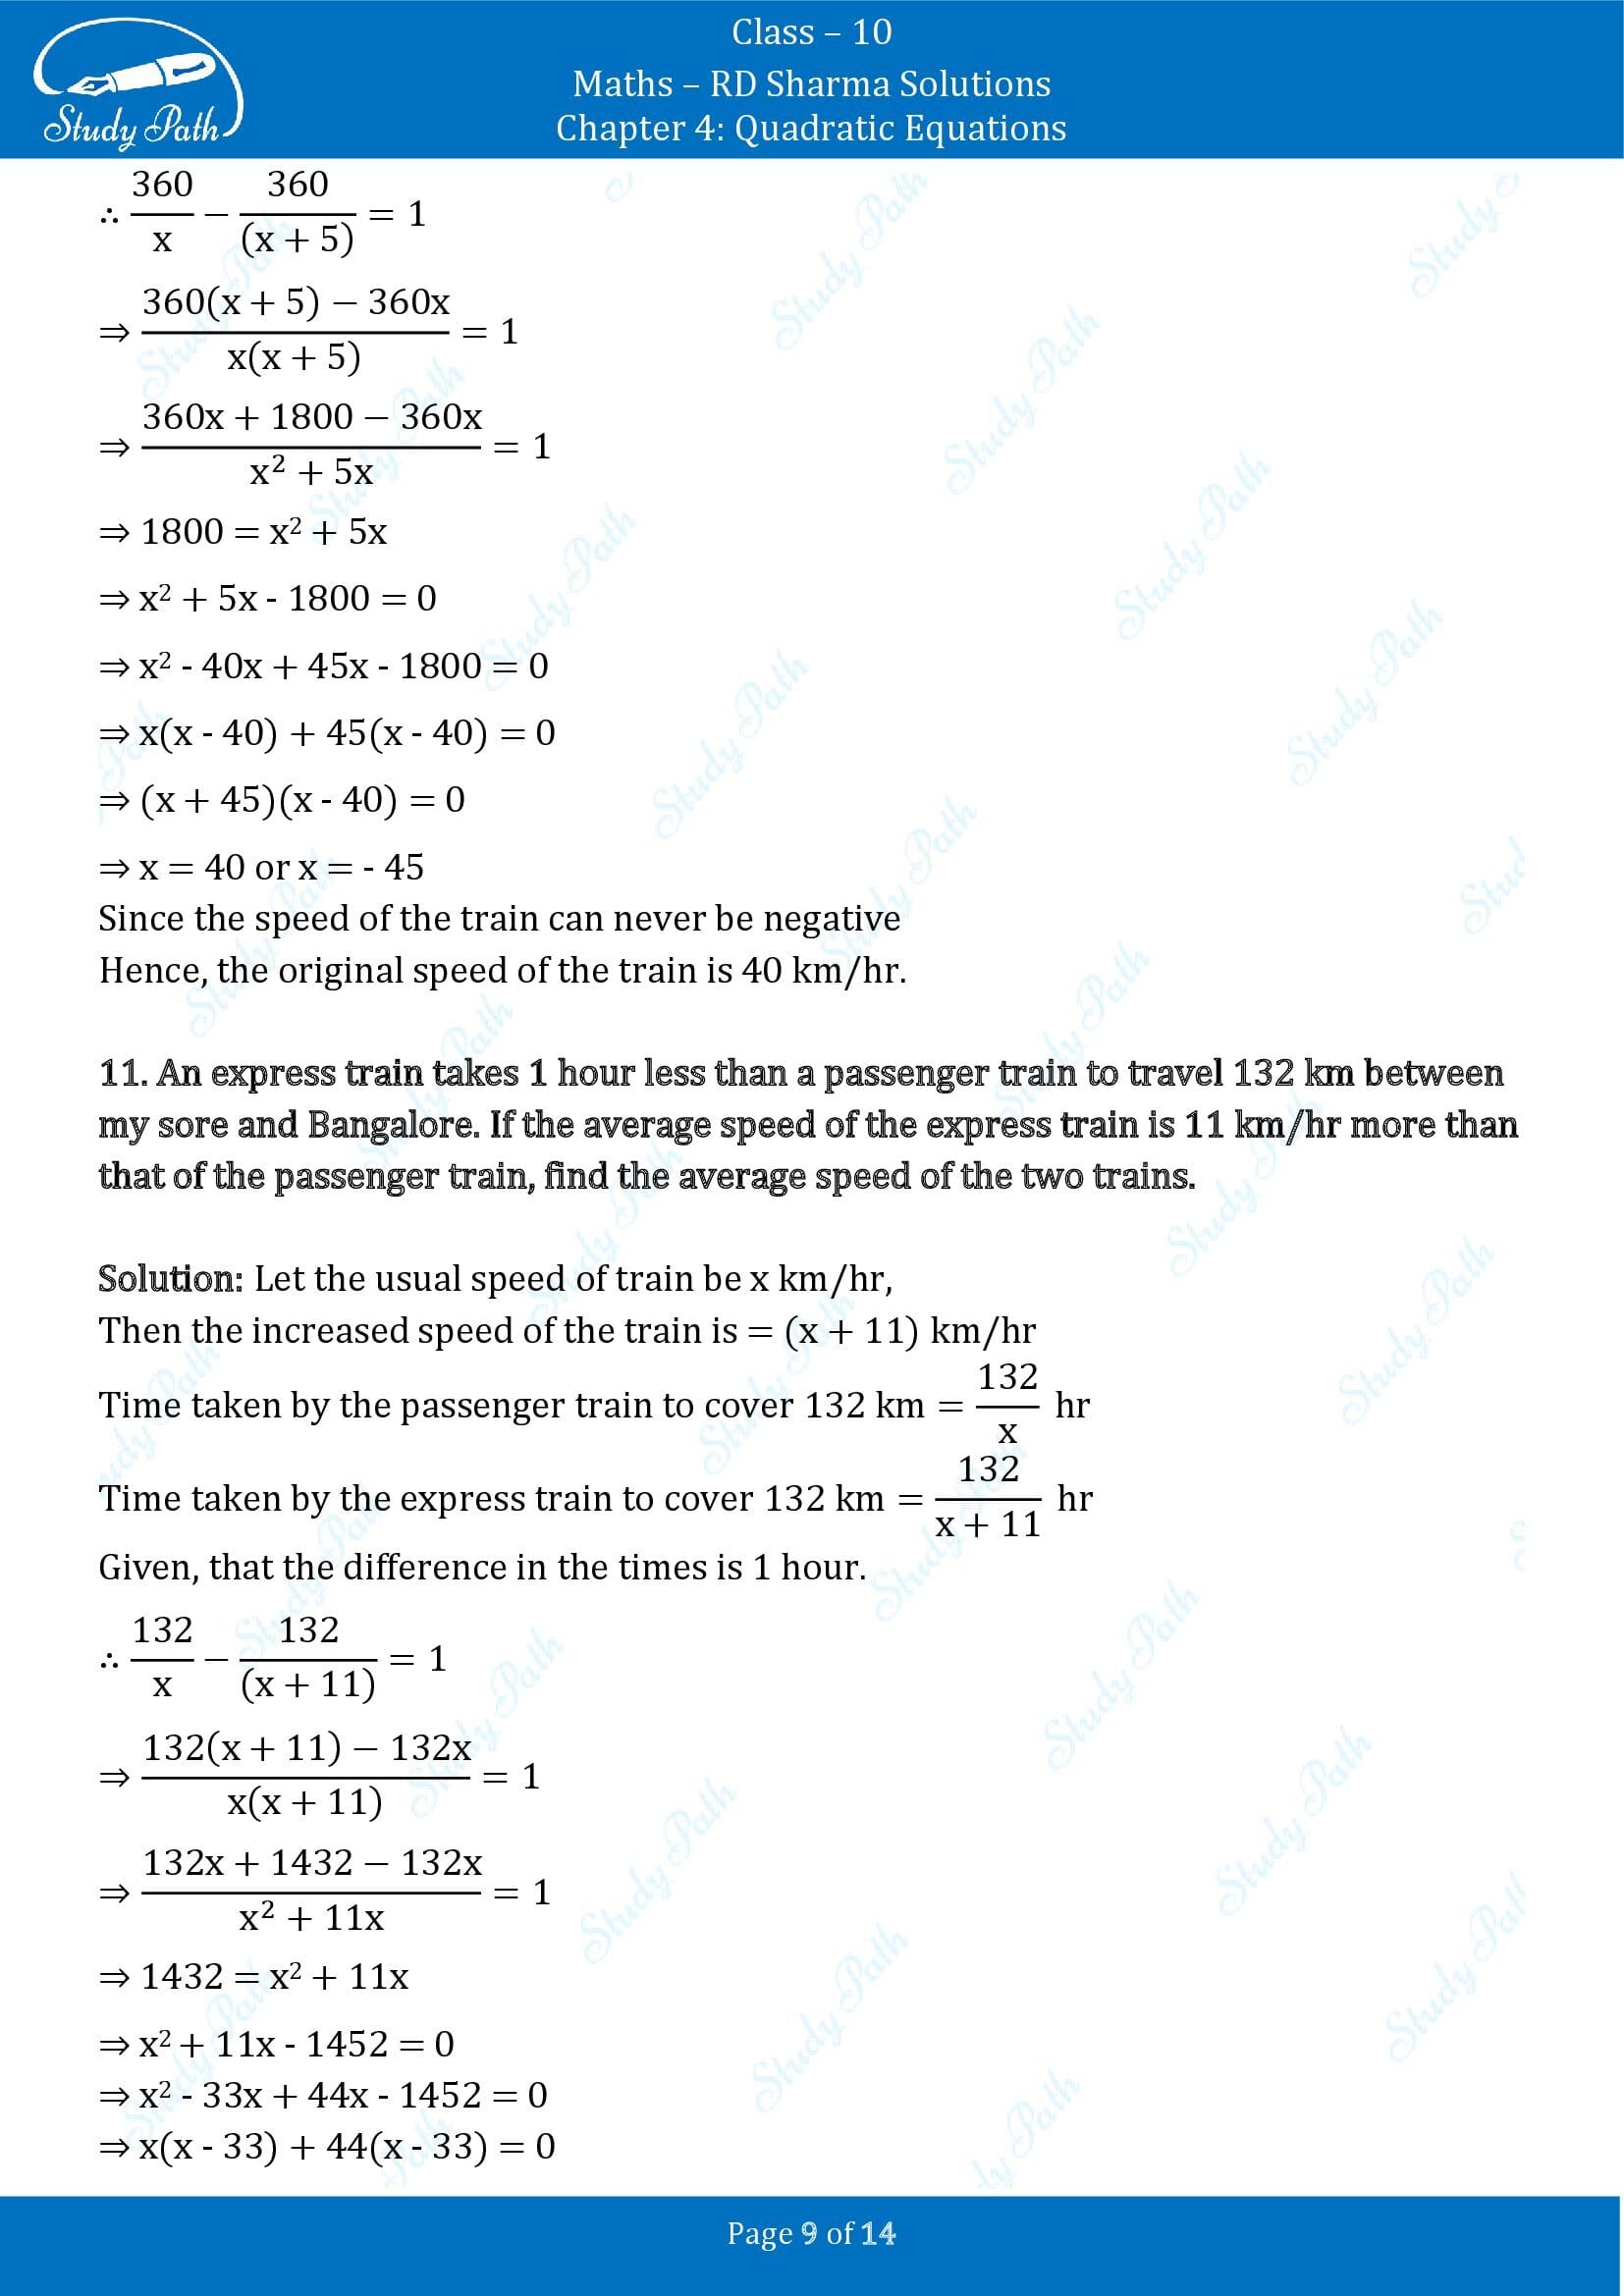 RD Sharma Solutions Class 10 Chapter 4 Quadratic Equations Exercise 4.8 00009